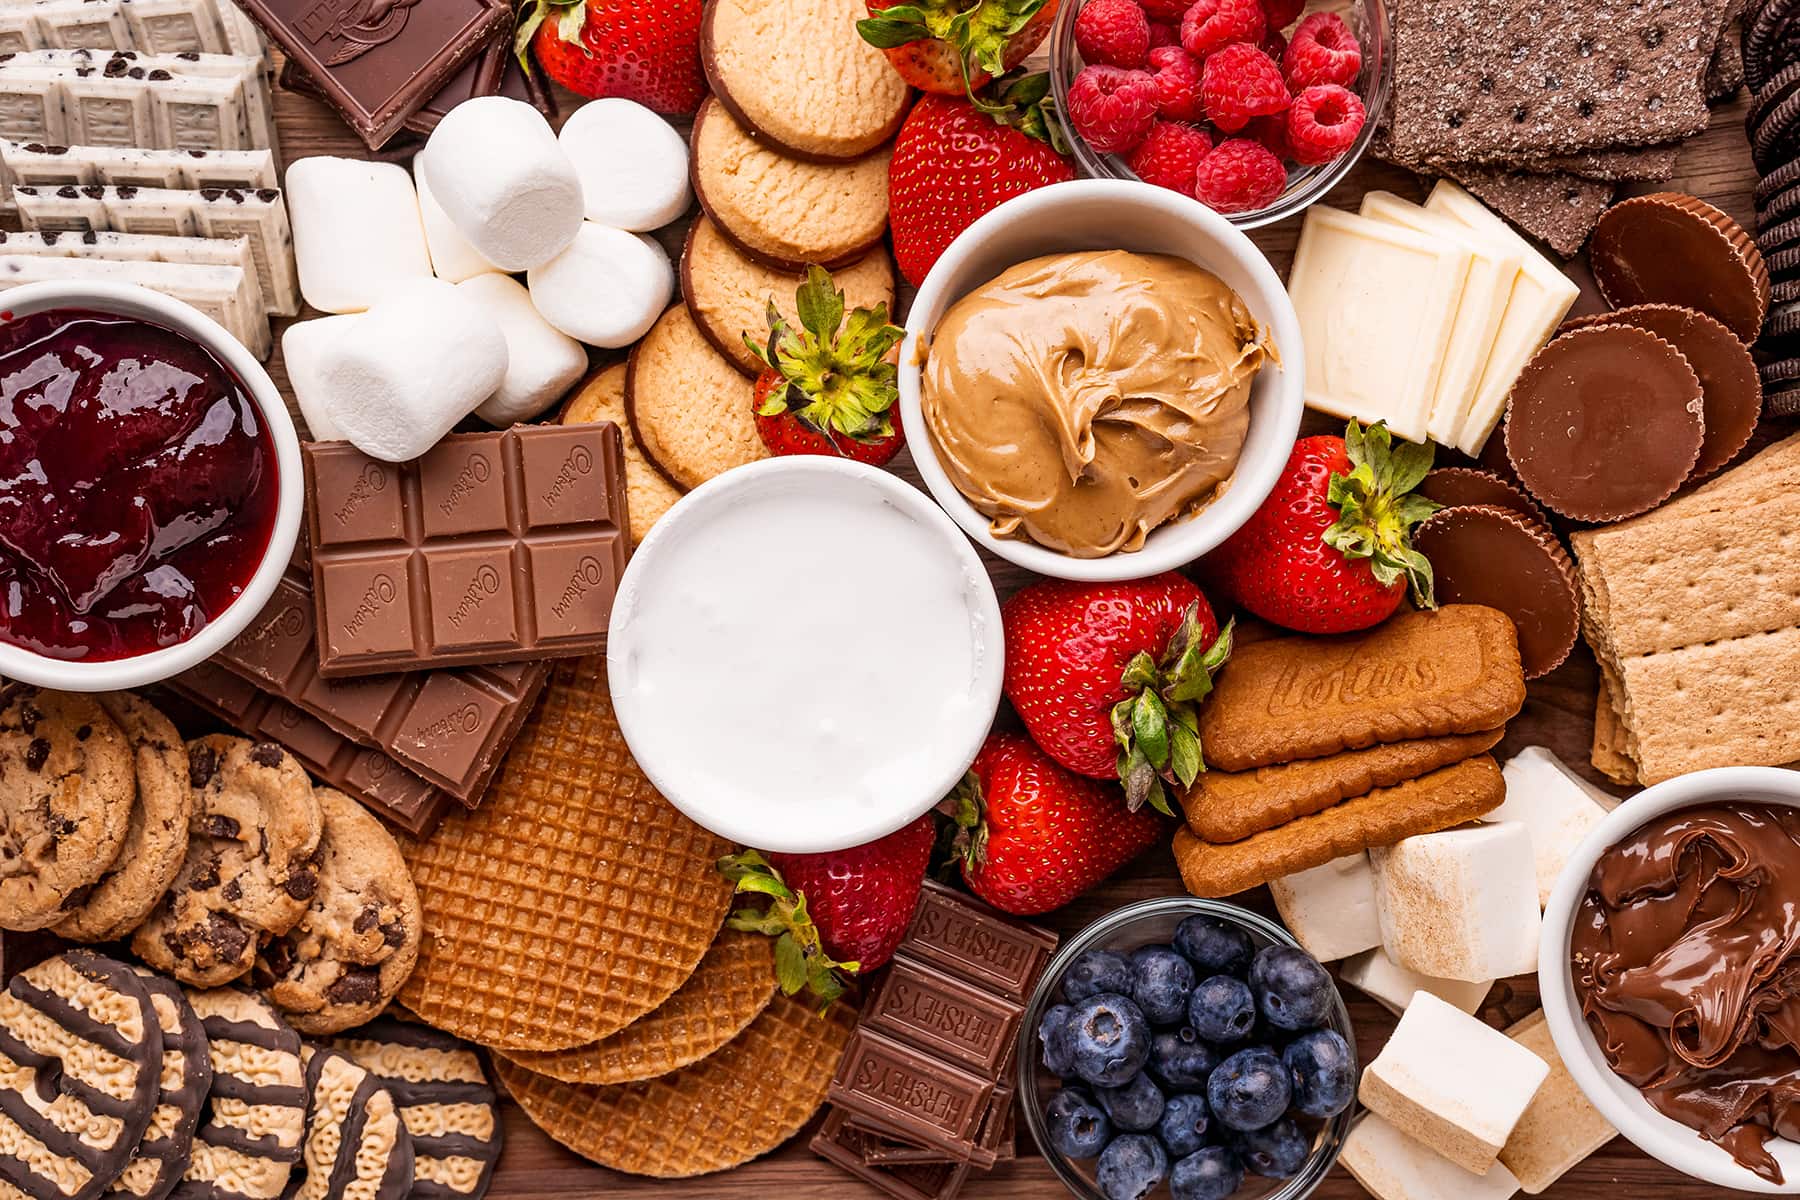 A s'mores board full of cookie choices, fresh berries, chocolate and dips to make a variety of s'mores.